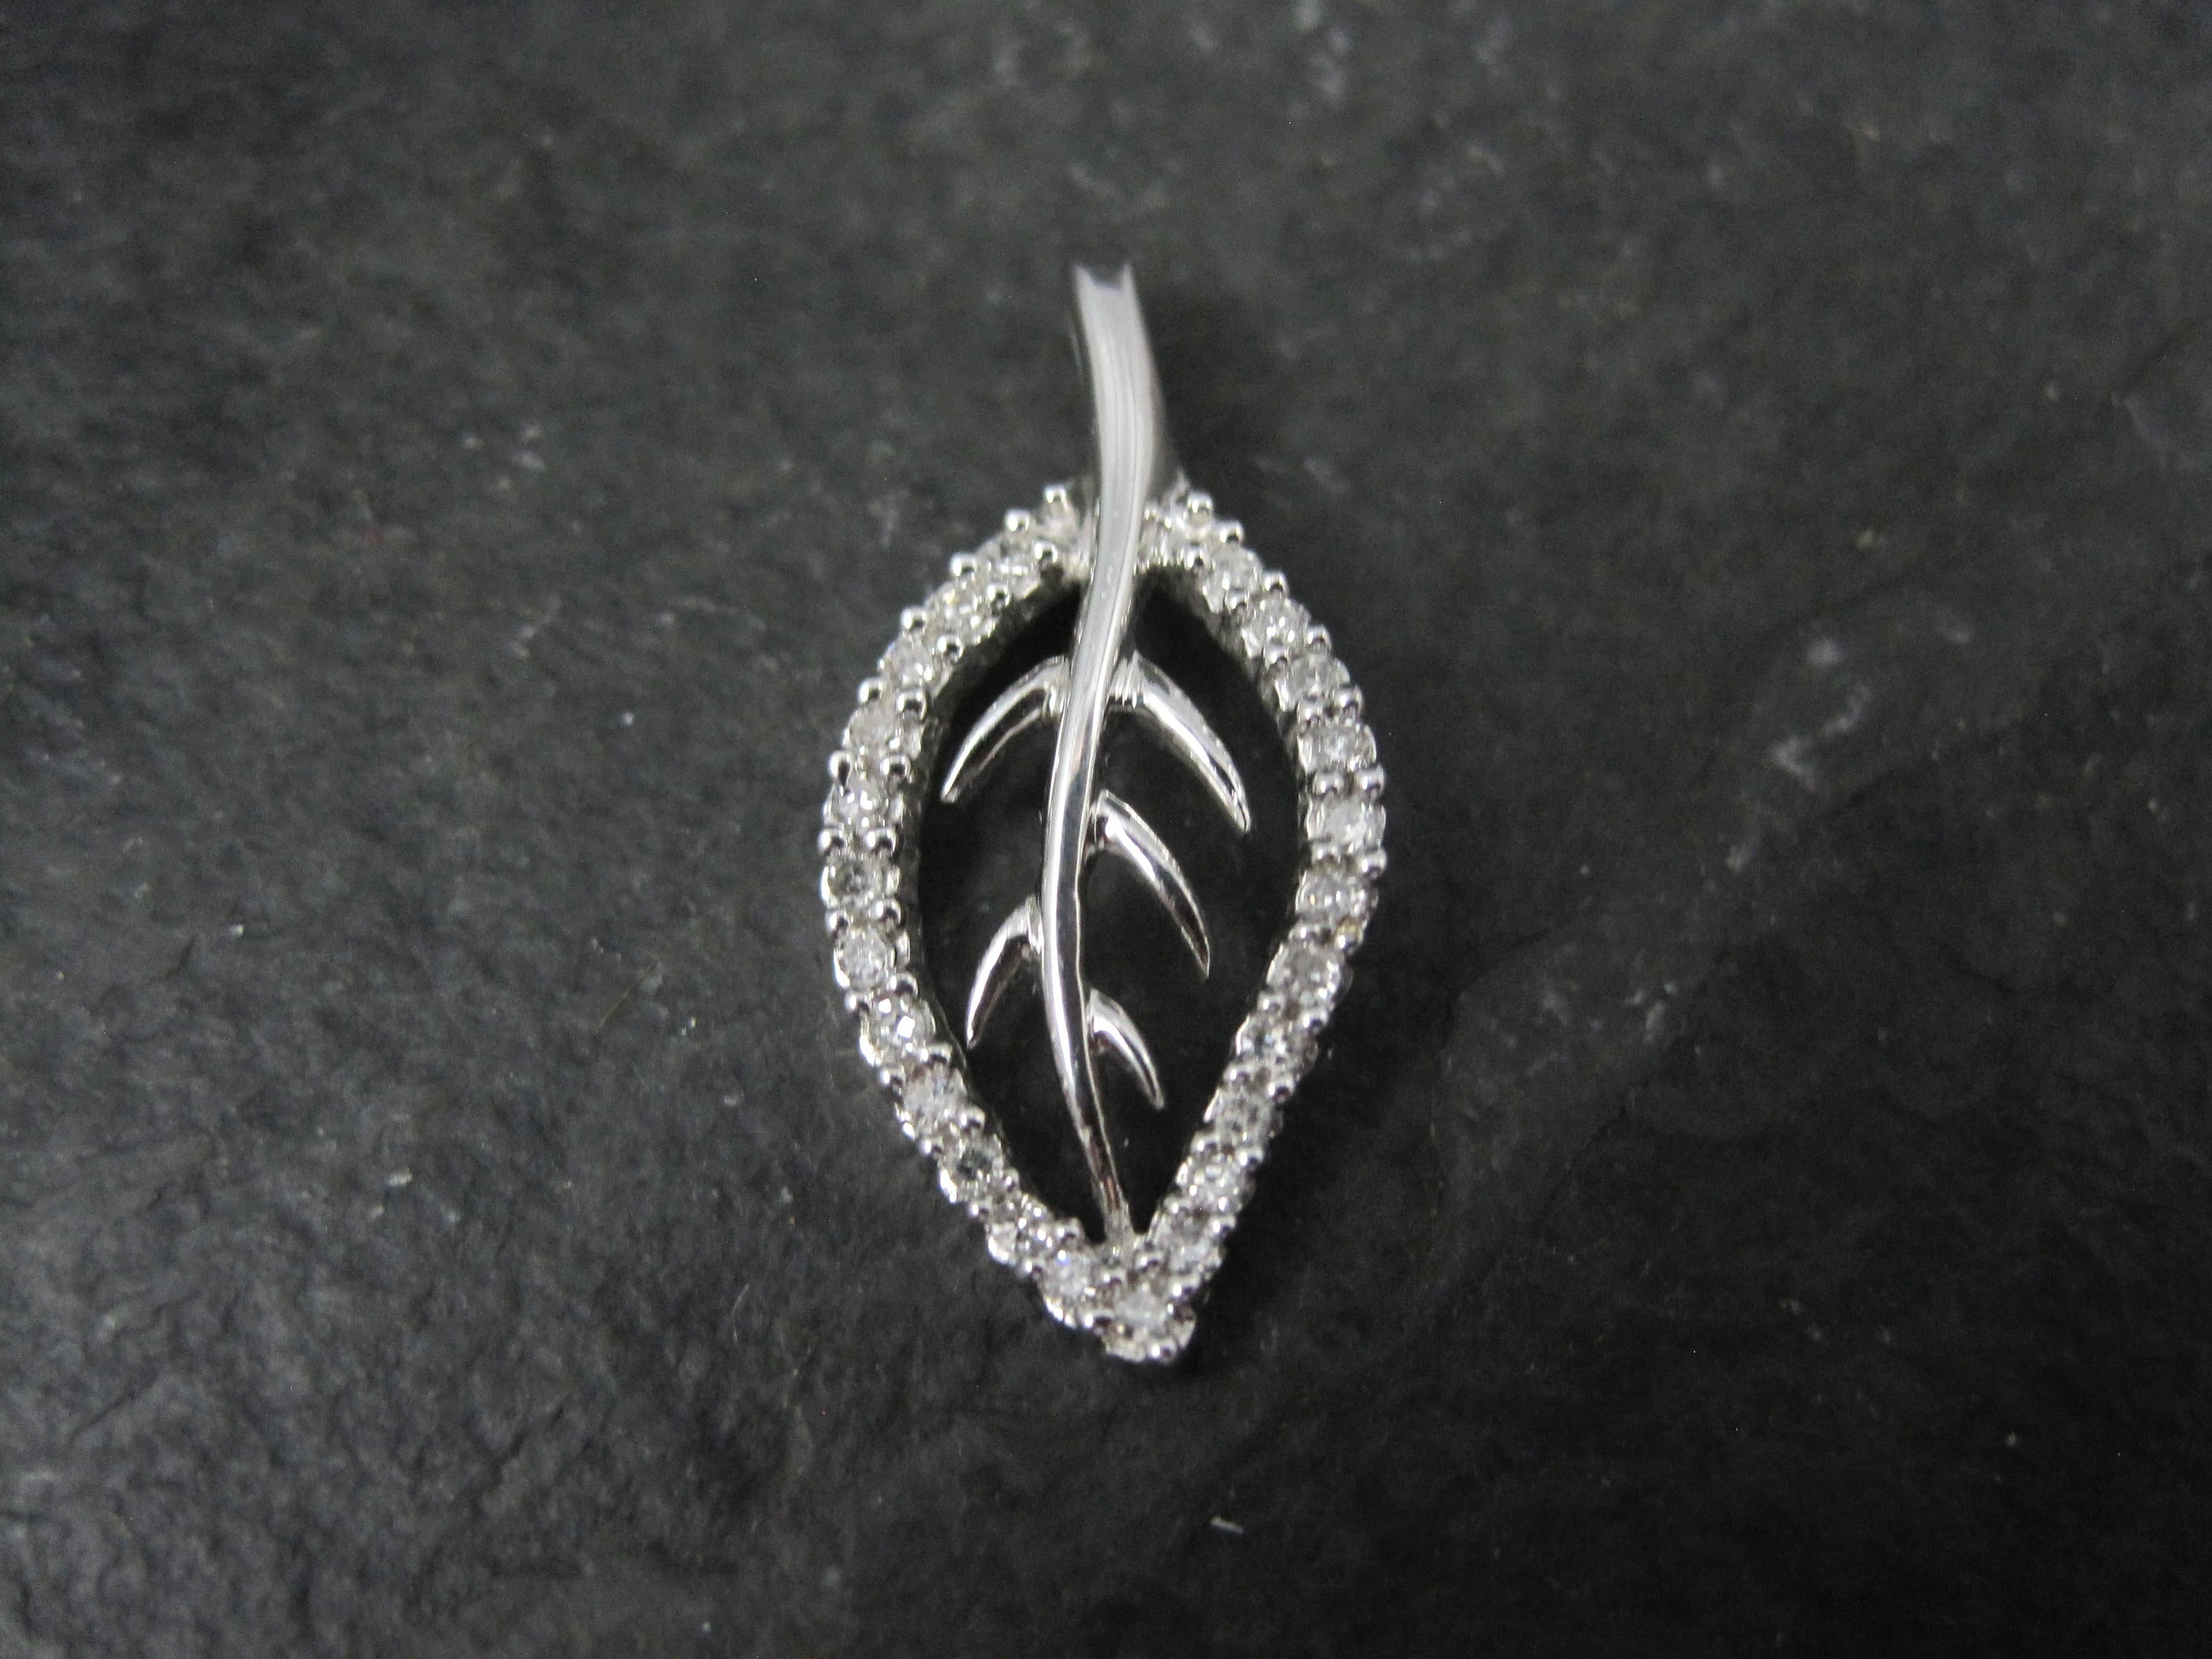 This beautiful leaf pendant is 10k white gold.
It features an estimated .20 carats in round diamonds.

Measurements: 7/16 by 15/16 of an inch

Marks: 10K, SUN
This hallmark belongs to the Diamond Sun Corp

Condition: Excellent